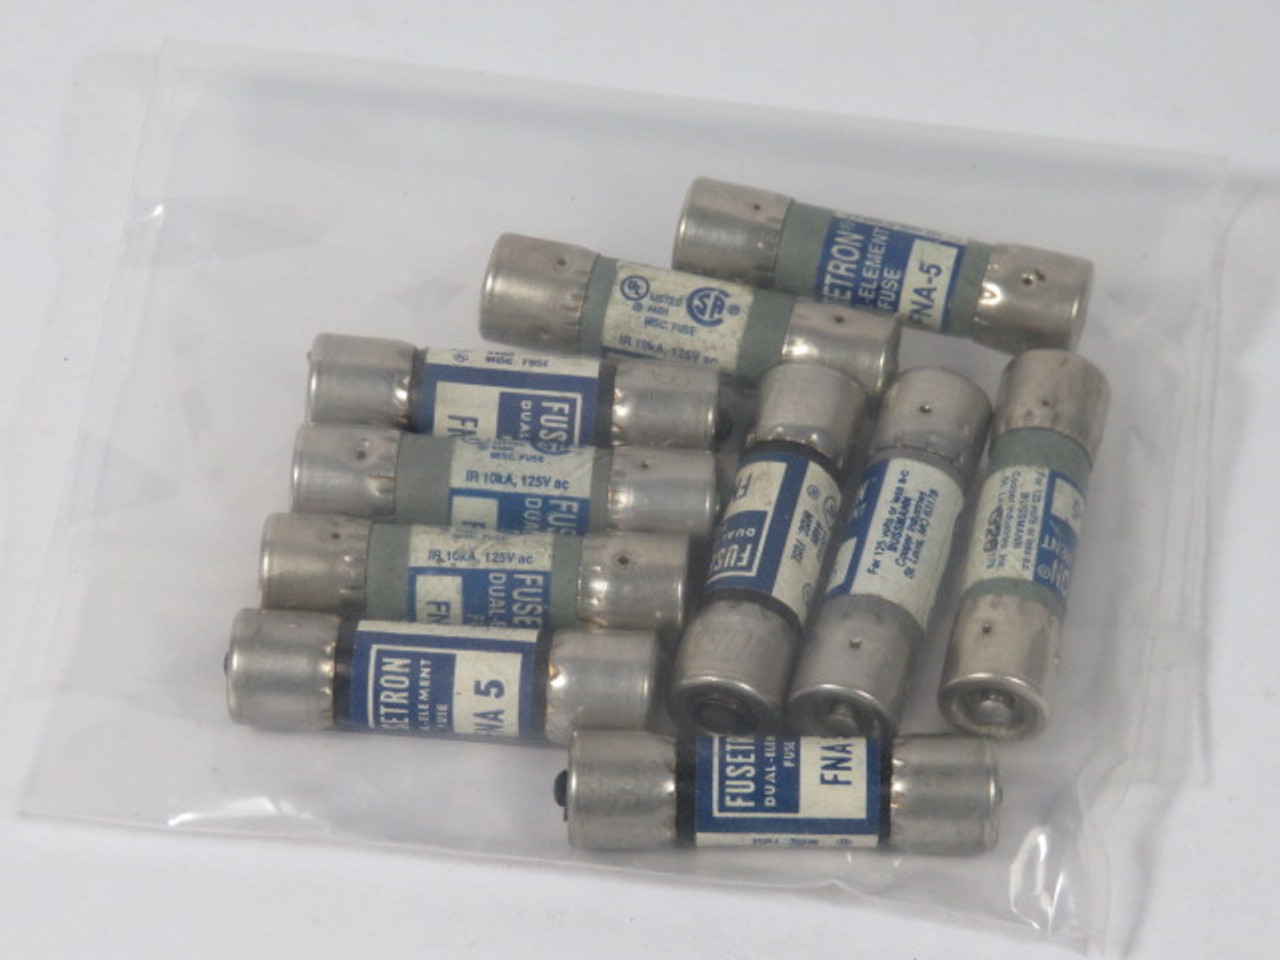 Fusetron FNA-5 Dual Element Fuse 5A 125V Lot of 10 USED